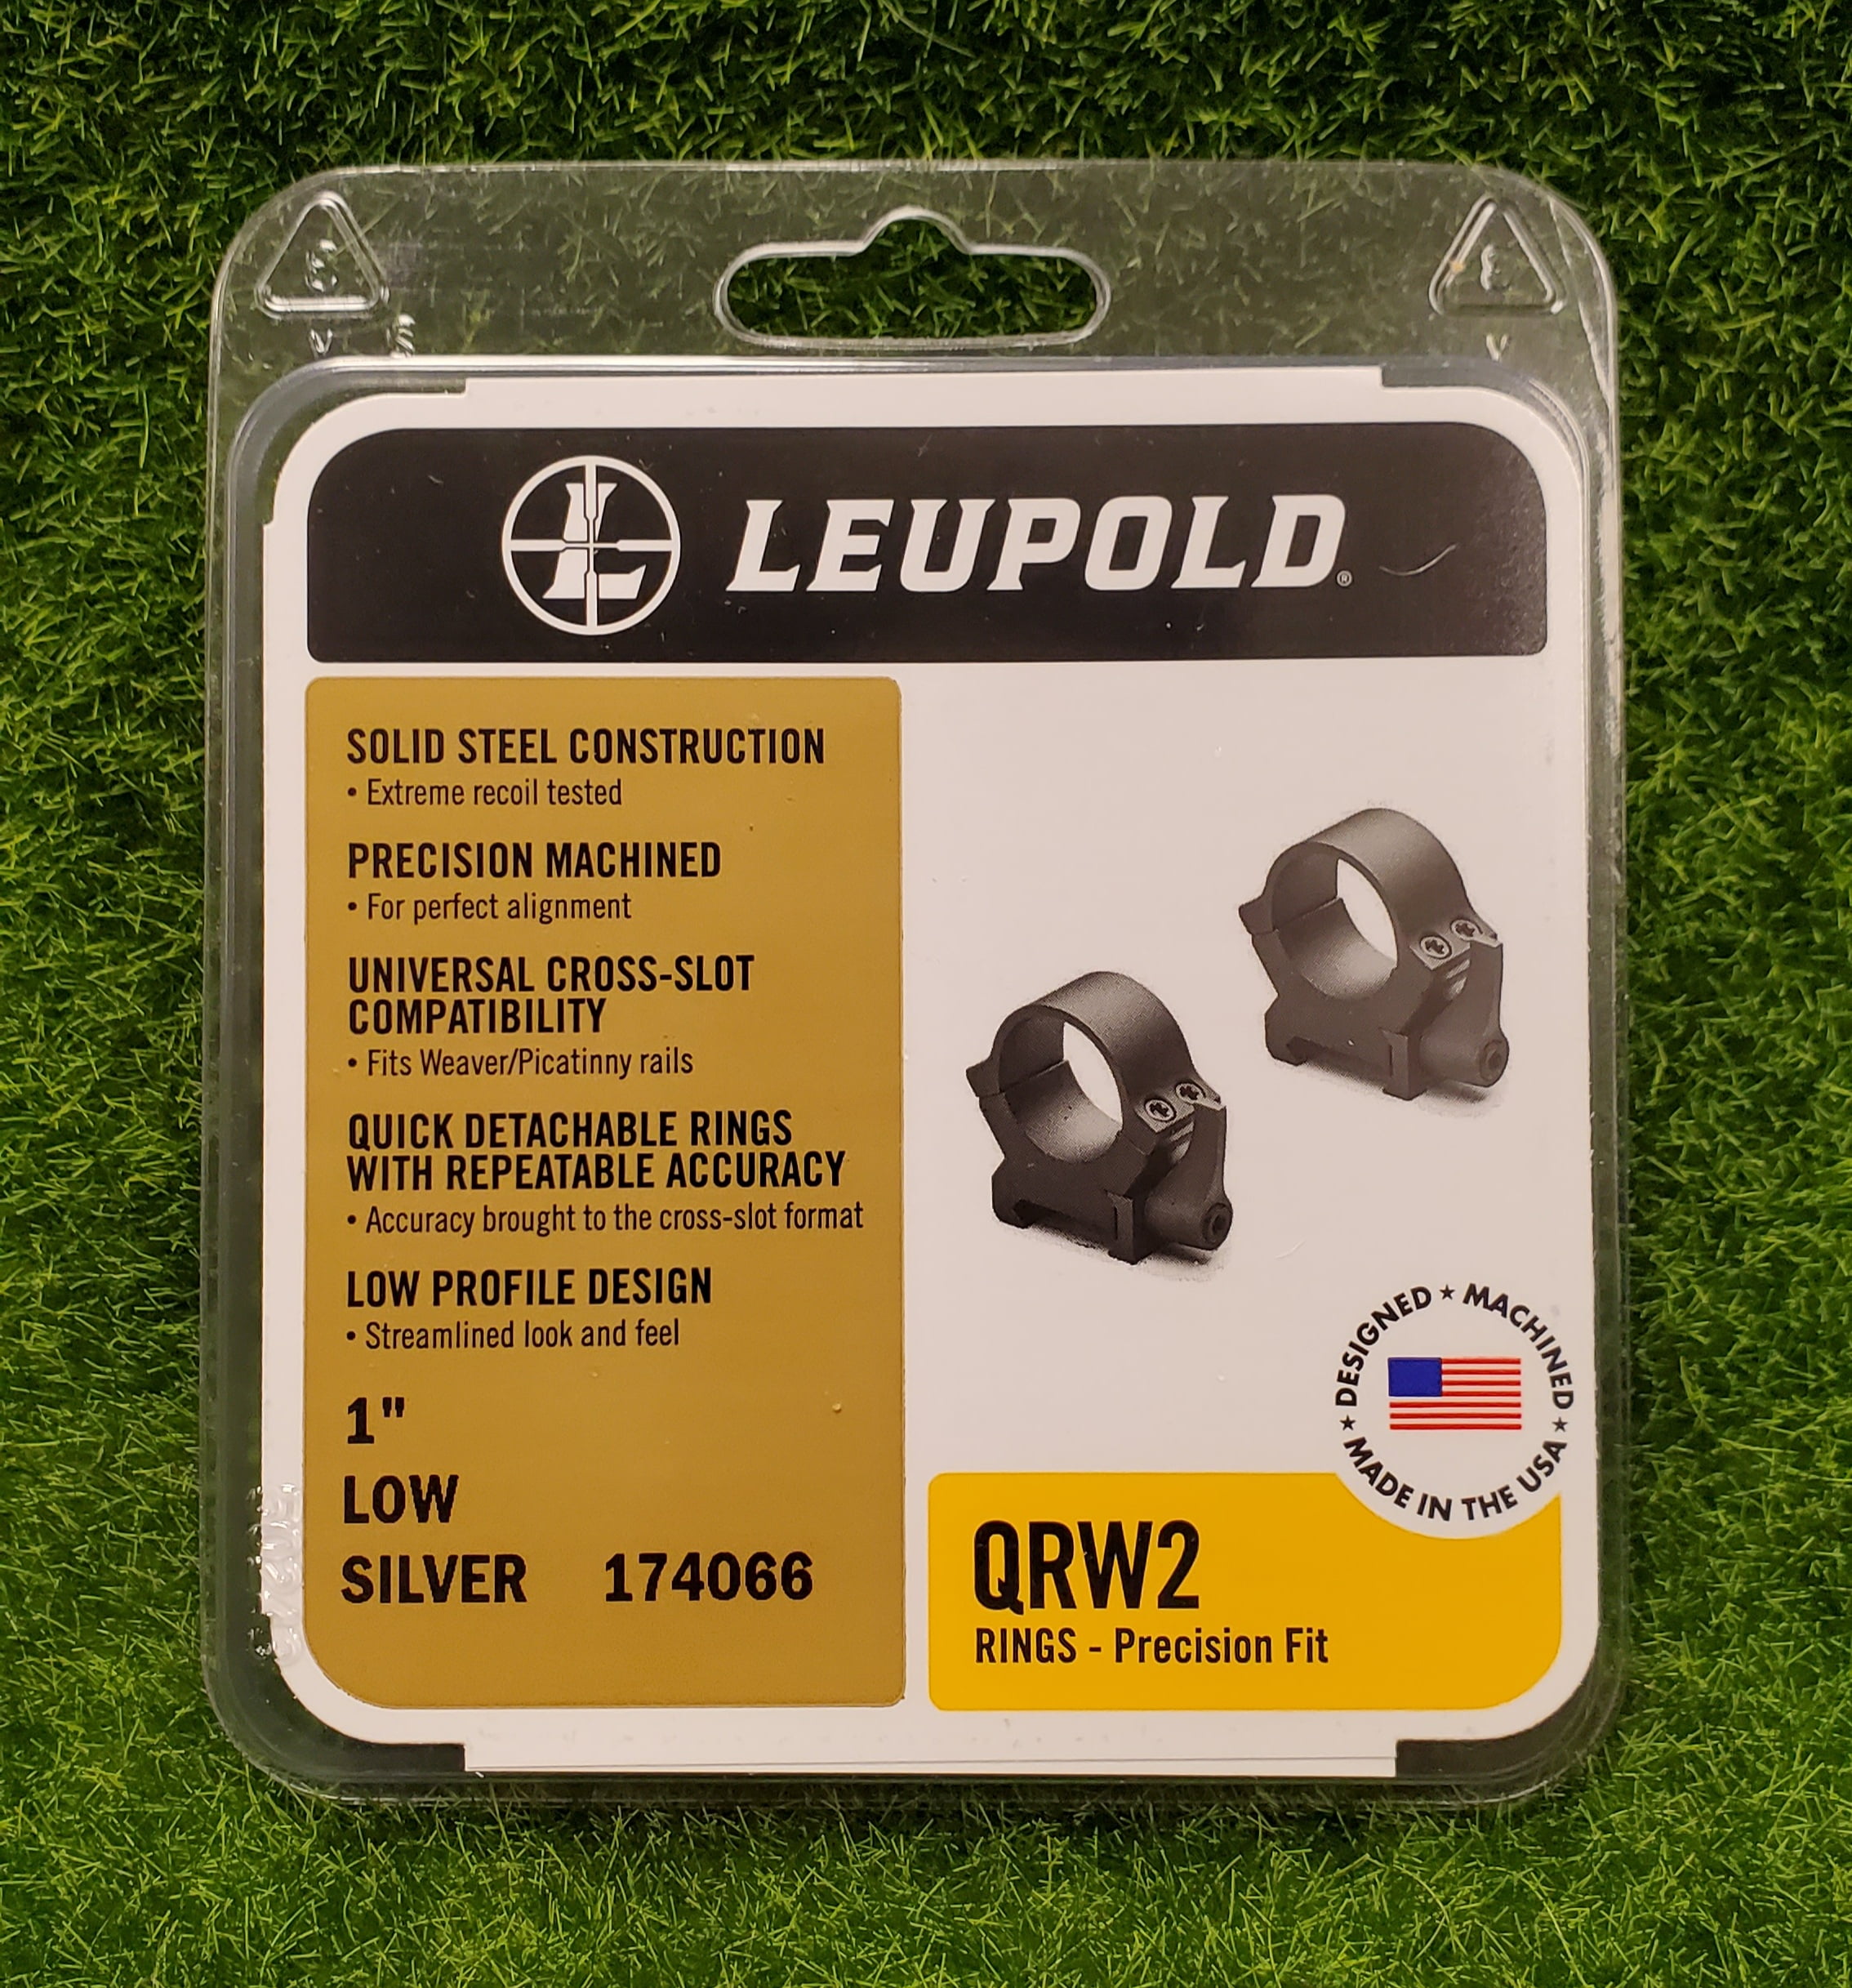 Leupold Qrw2 Scope Rings 1-in Low Silver 174066 for sale online 